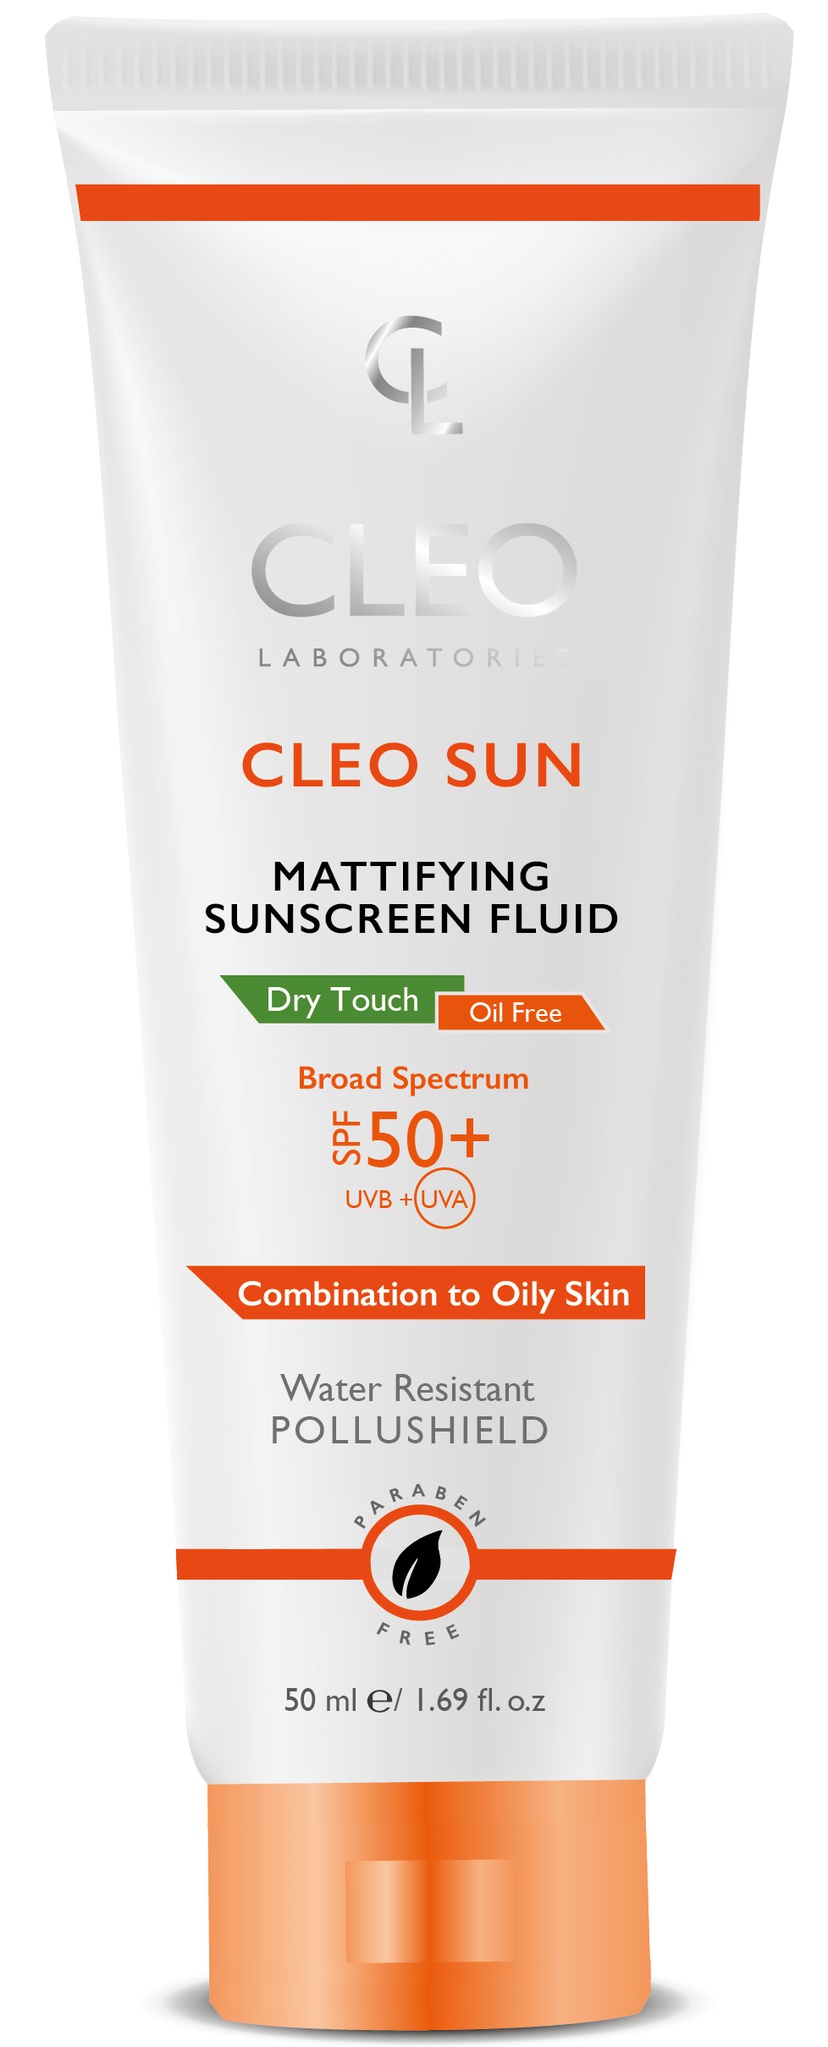 Cleo Dry Touch Mattifying Sunscreen Fluid